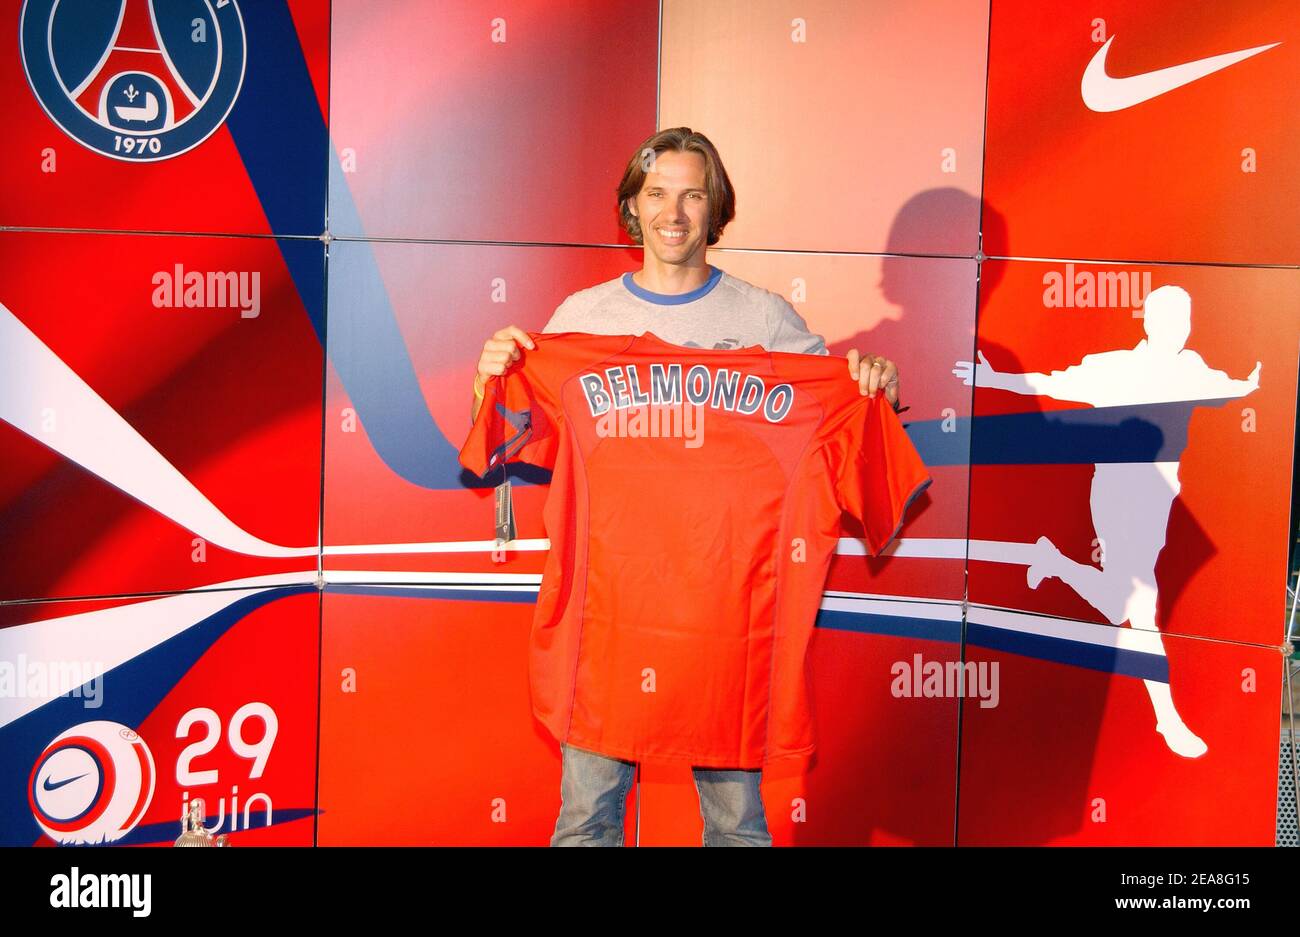 woede taxi excelleren French racing team boss Paul Belmondo pictured at the party for the  presentation of the PSG soccer team's new shirt made by sponsor Nike at the  Parc des Princes stadium in Paris-France